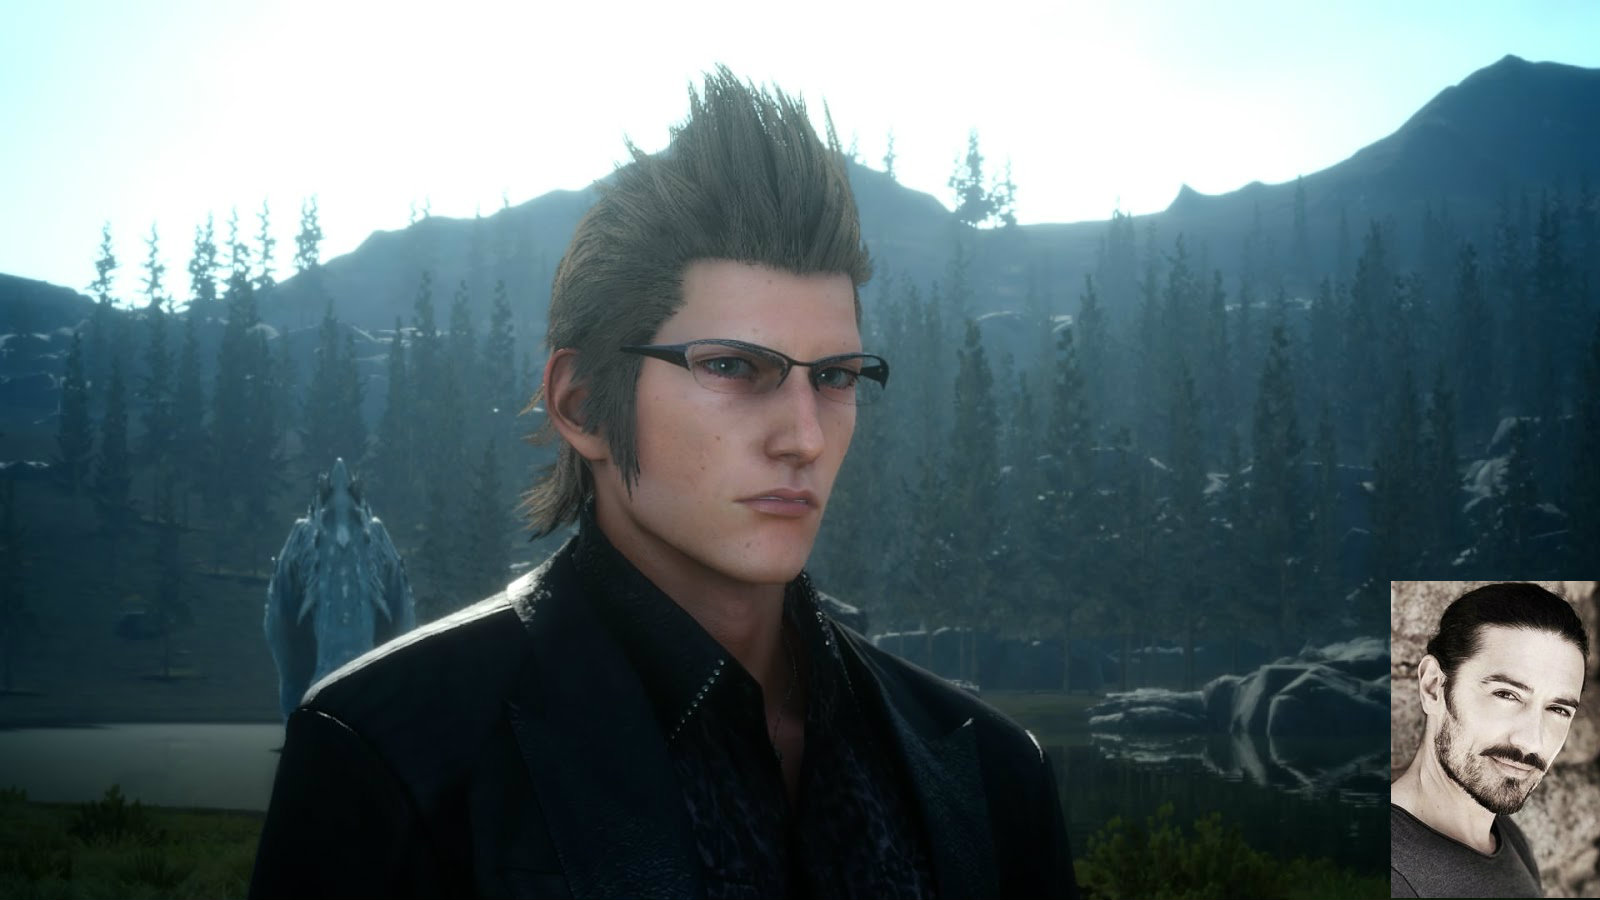 Creating Character In Final Fantasy XV: An Interview With Adam Croasdell